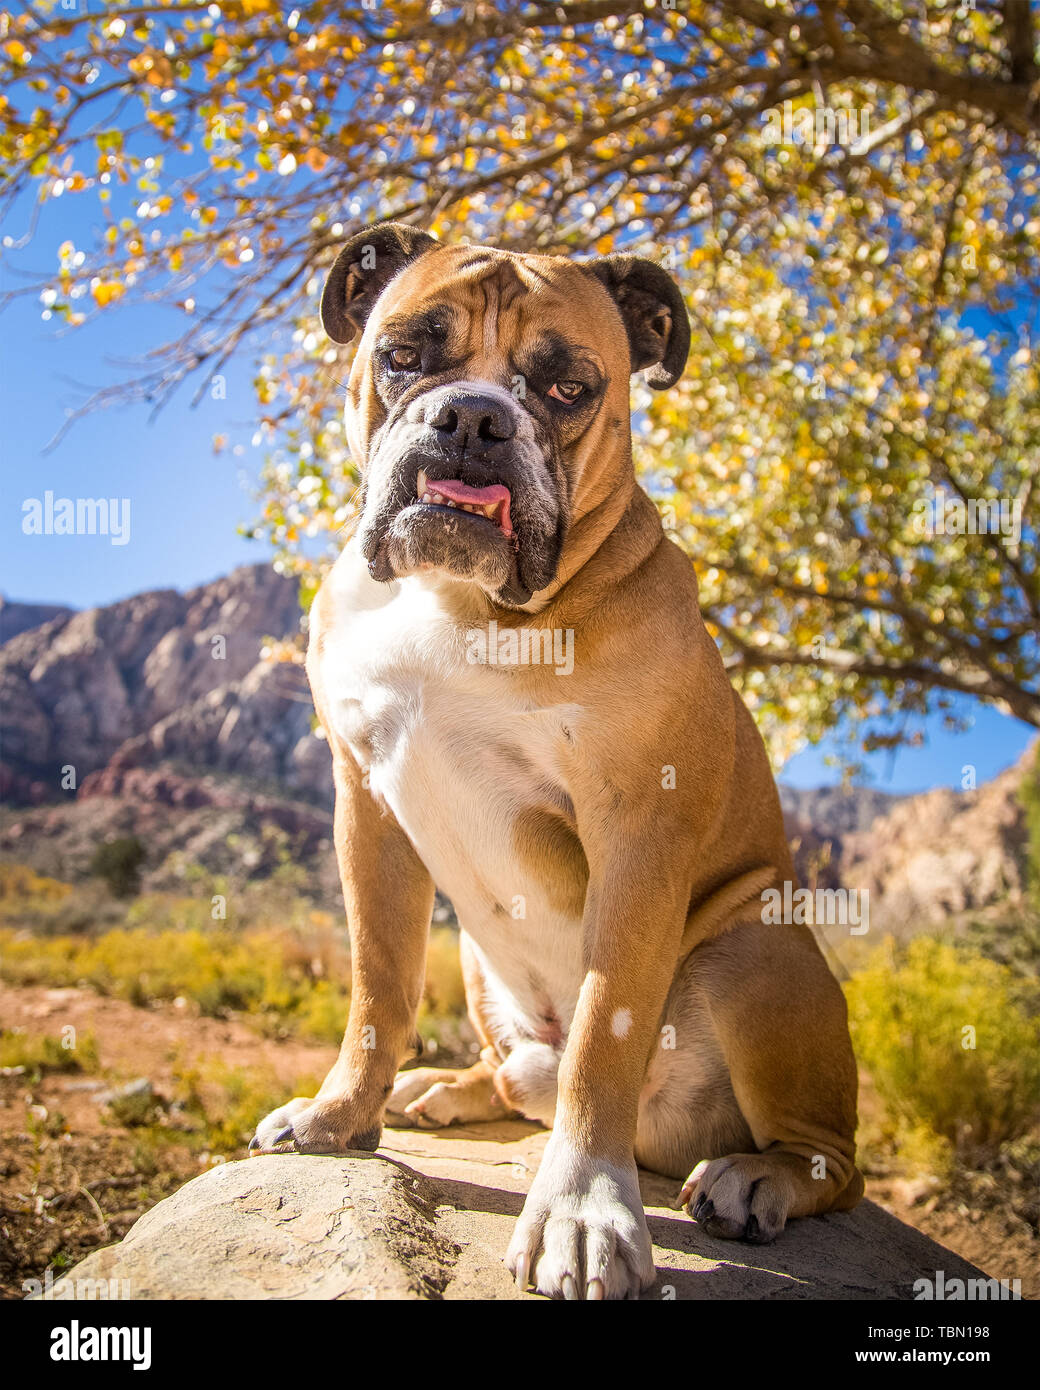 Bulldog portrait in the desert during a cool Fall day Stock Photo